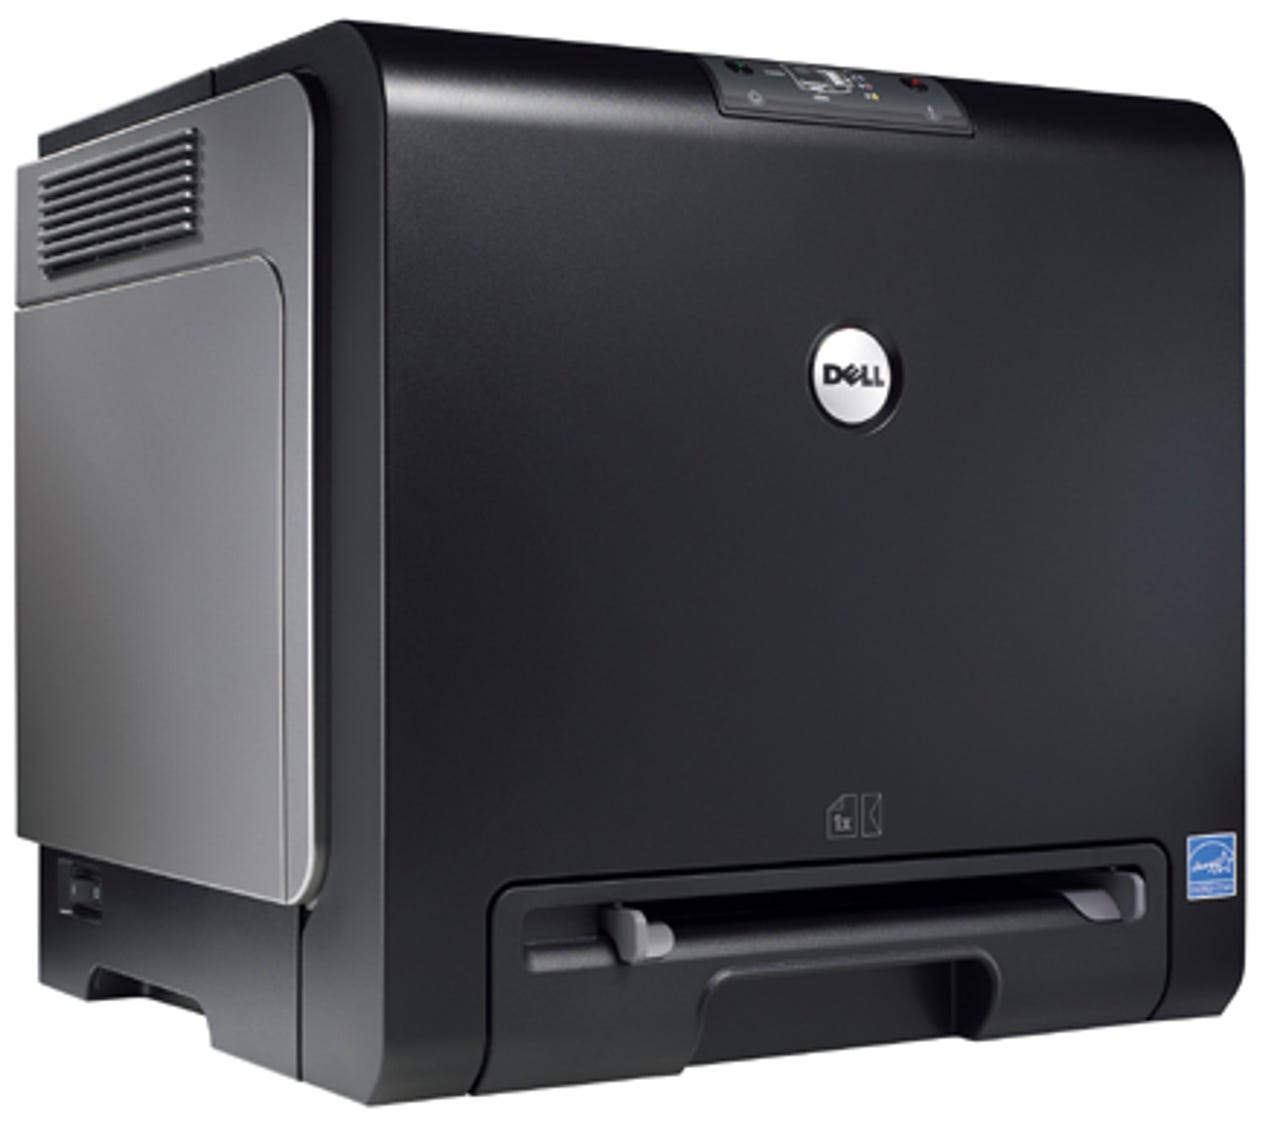 photos-dell-launches-vostro-range-for-small-business6.jpg